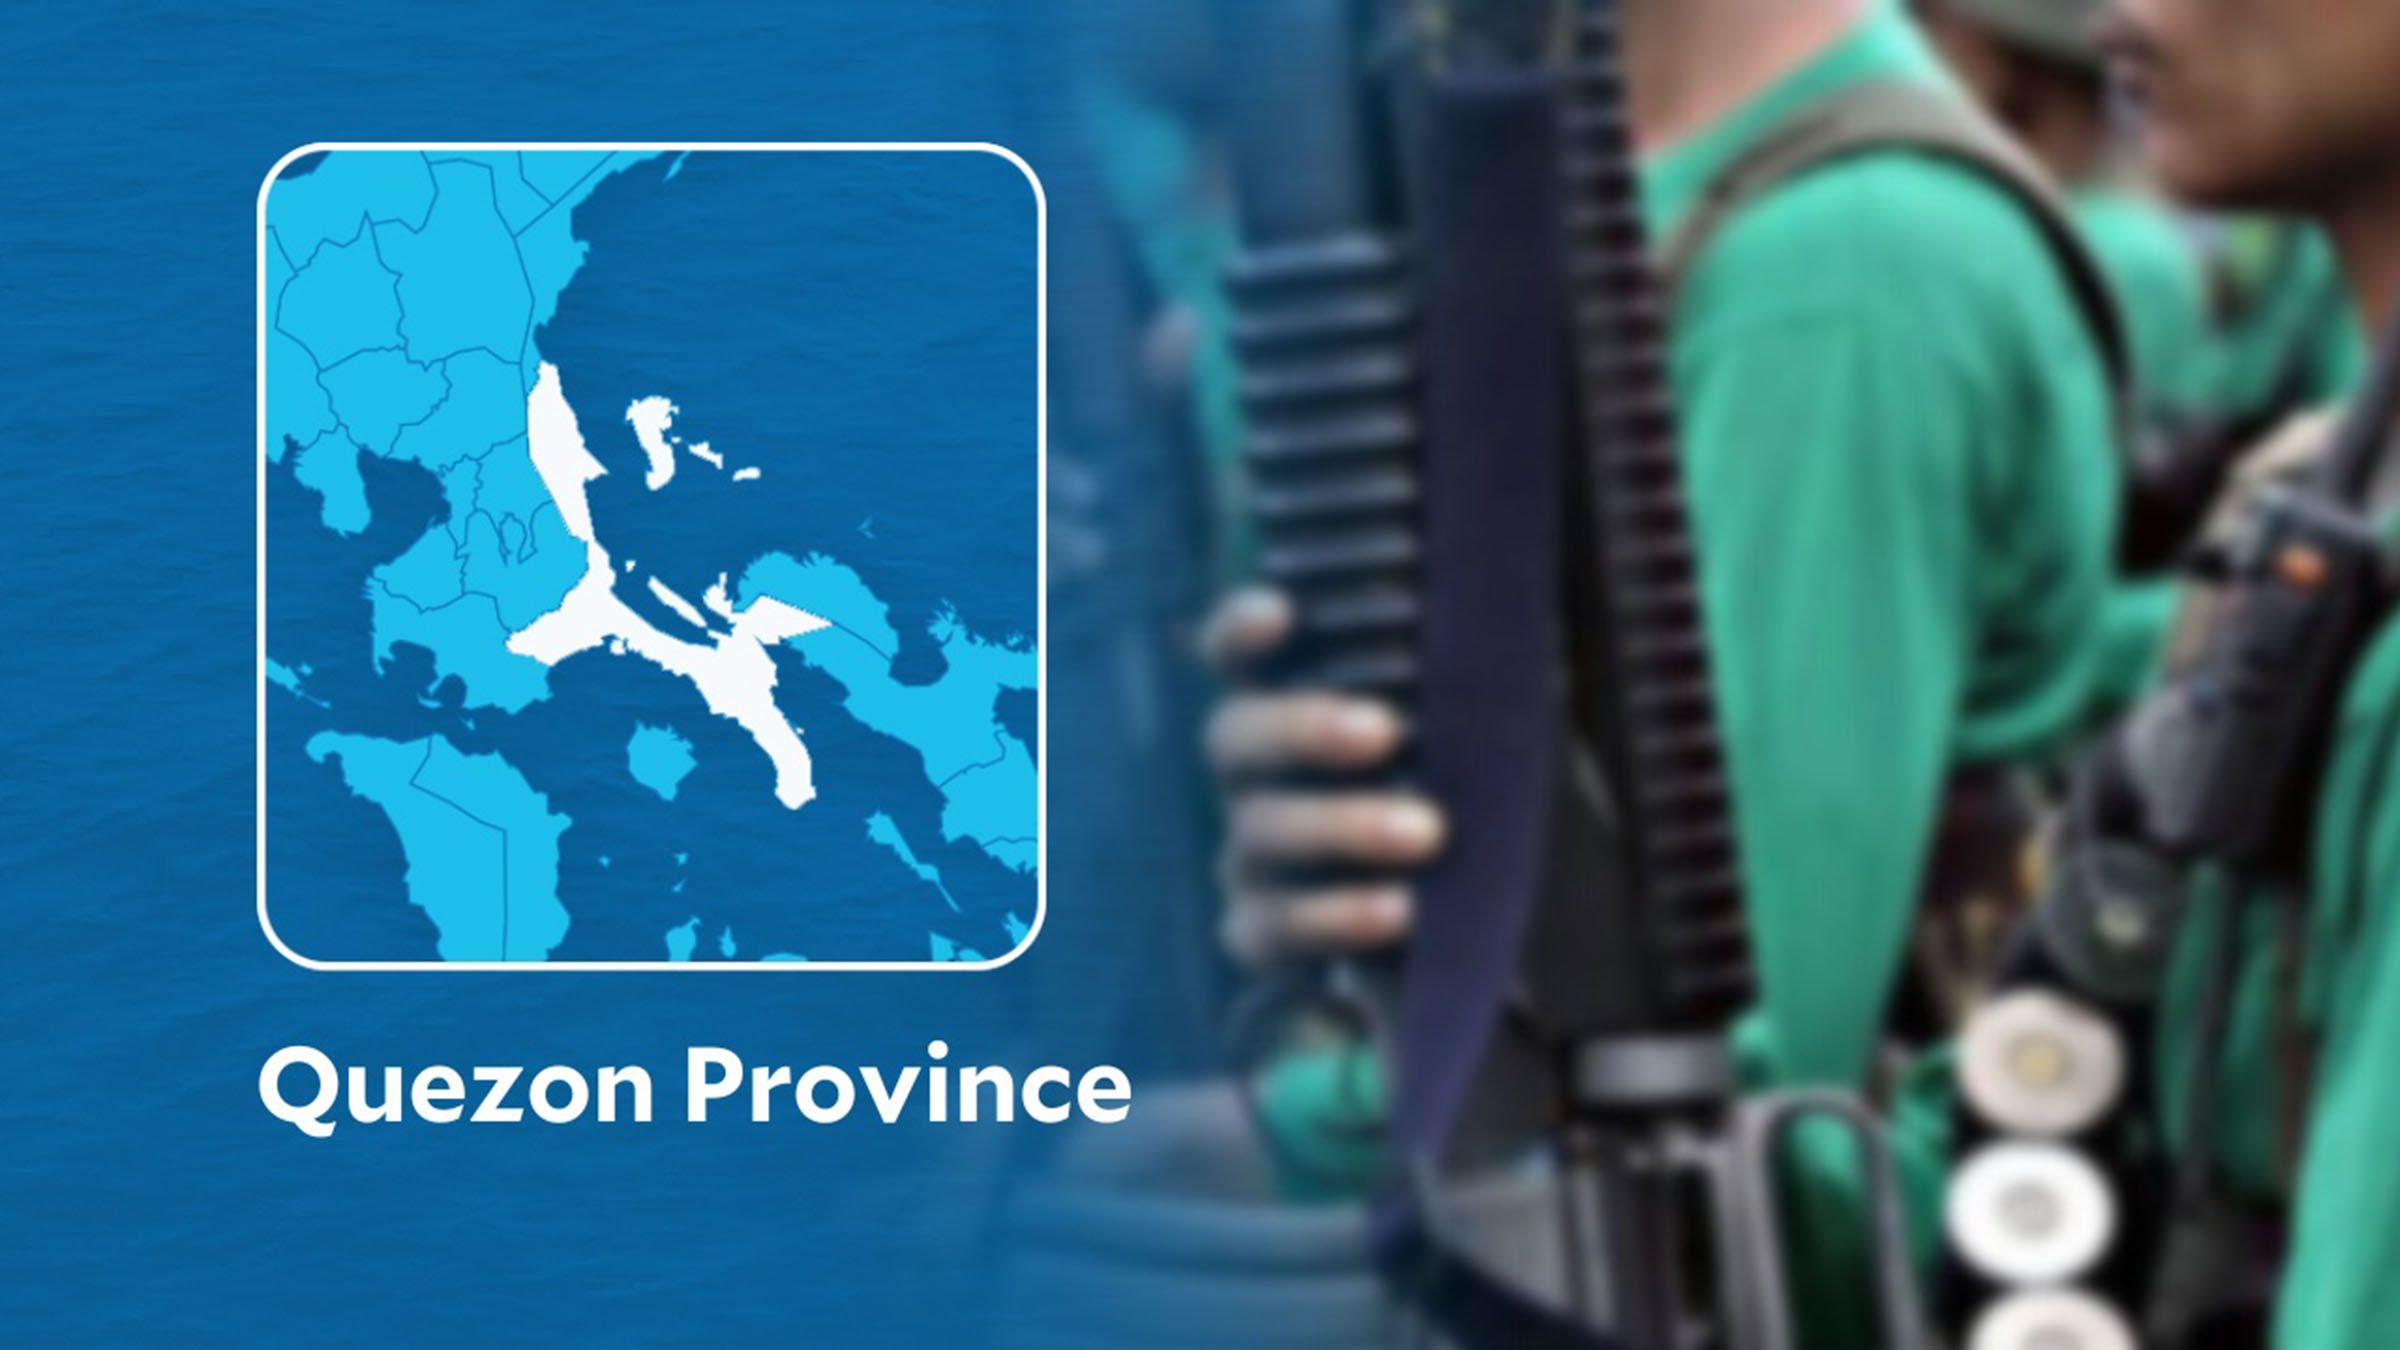 More areas in Quezon Province are insurgency-free